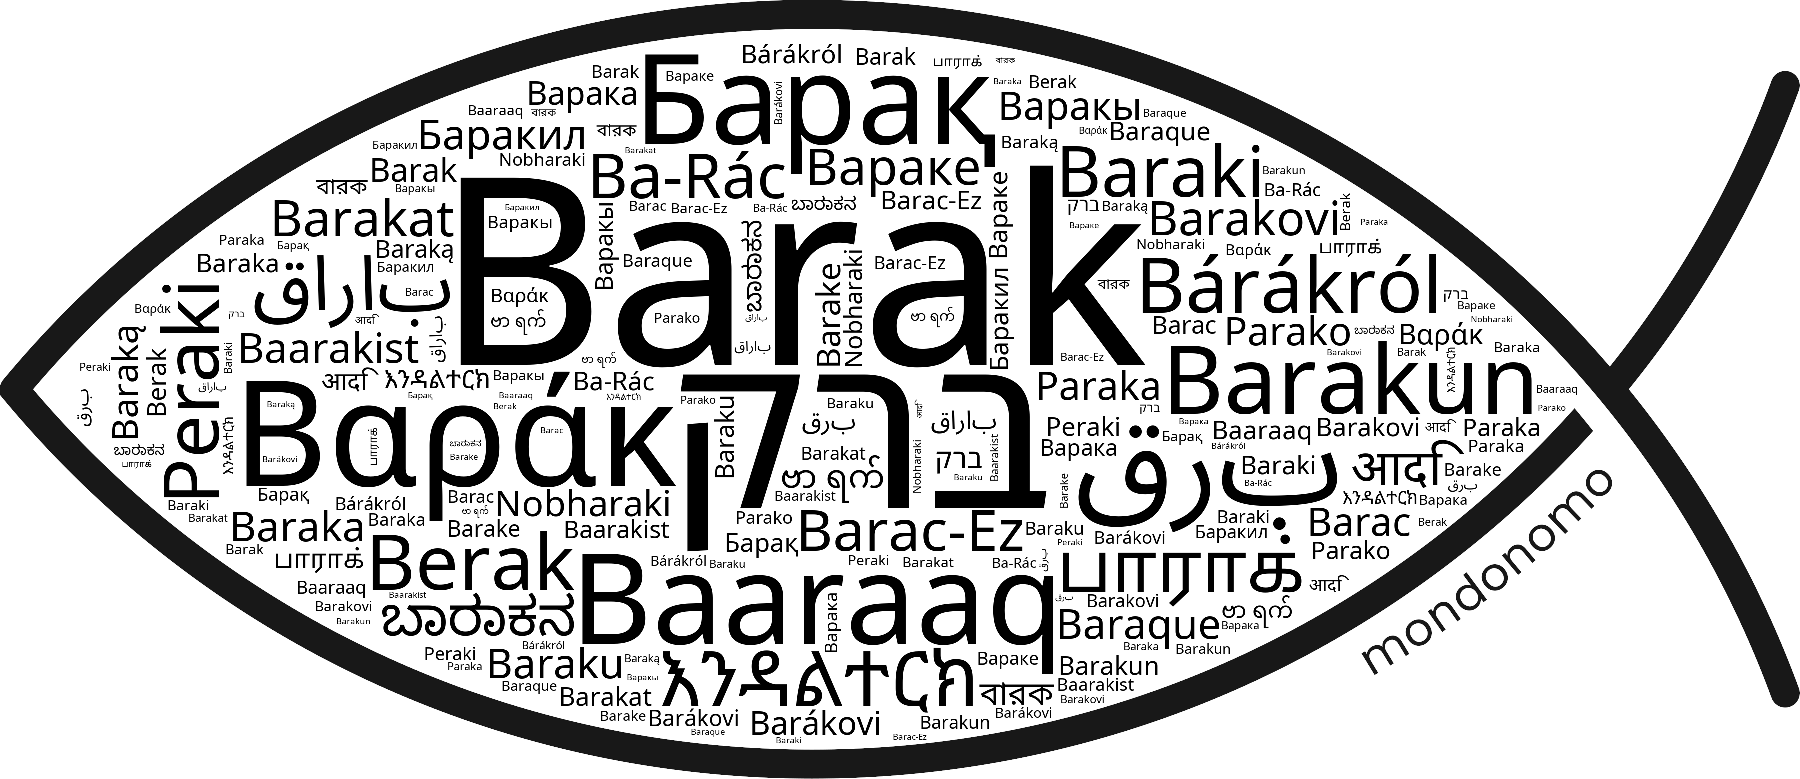 Name Barak in the world's Bibles